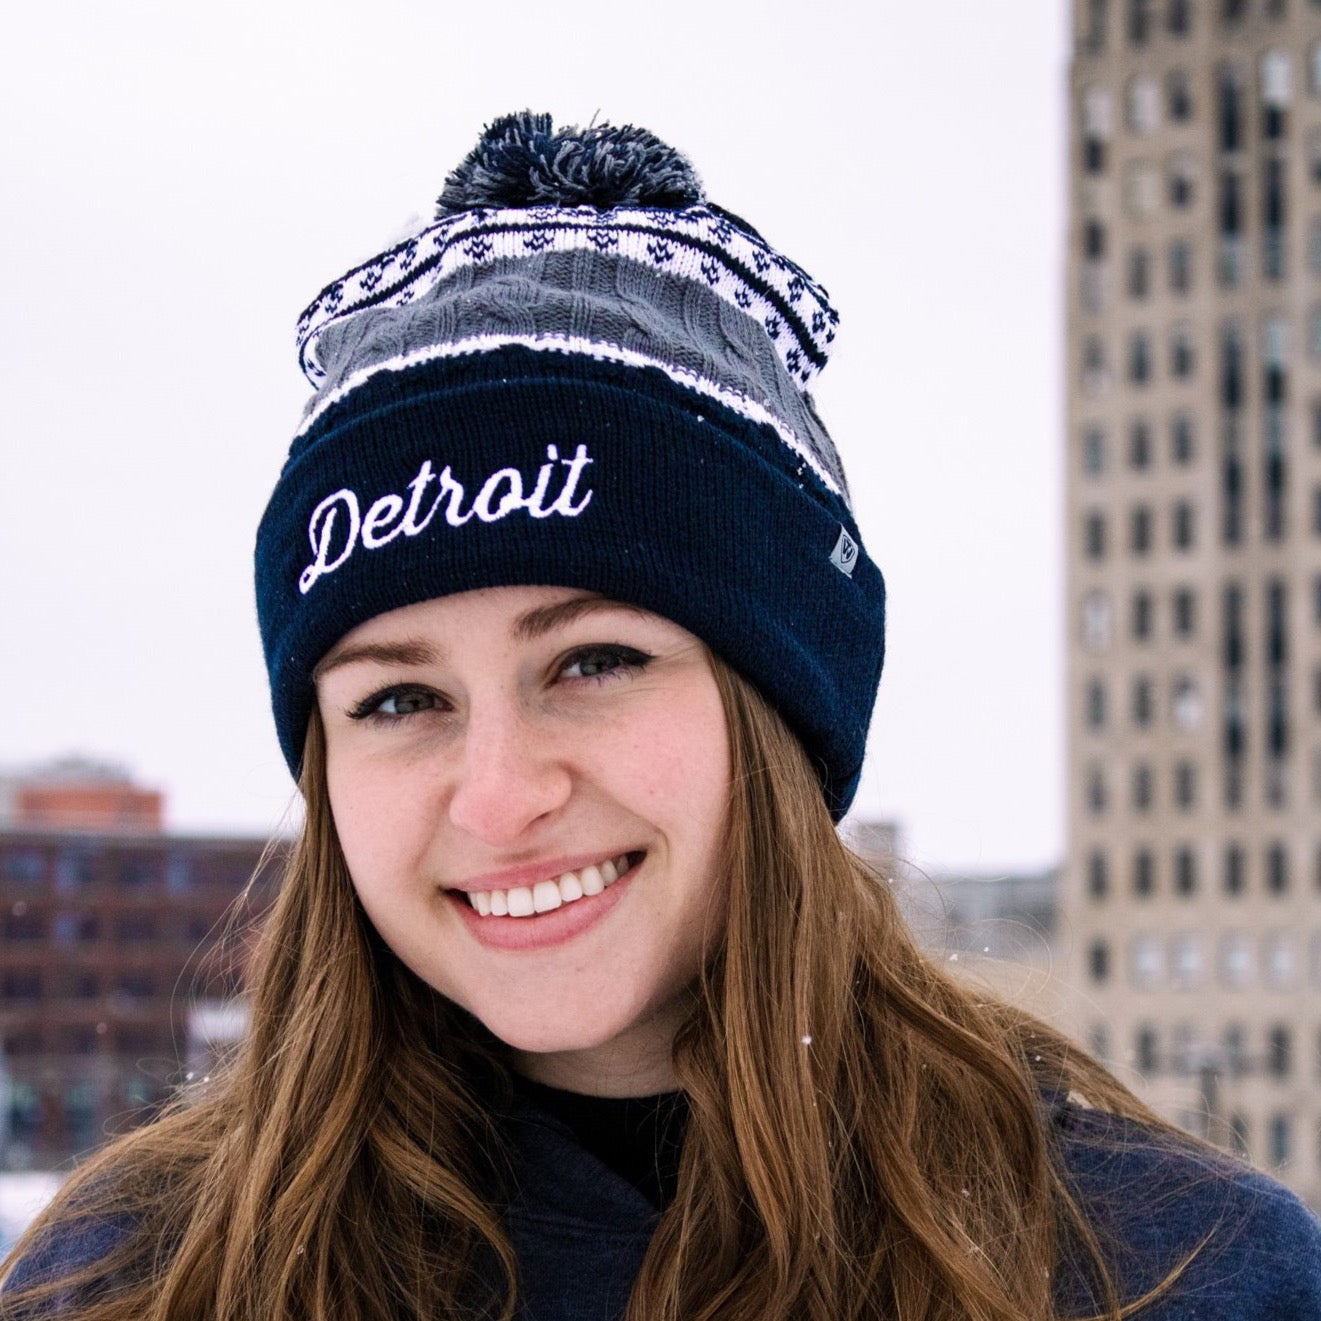 Hat - Detroit Thirsty Cable Knit TOTW - Navy/Grey/White